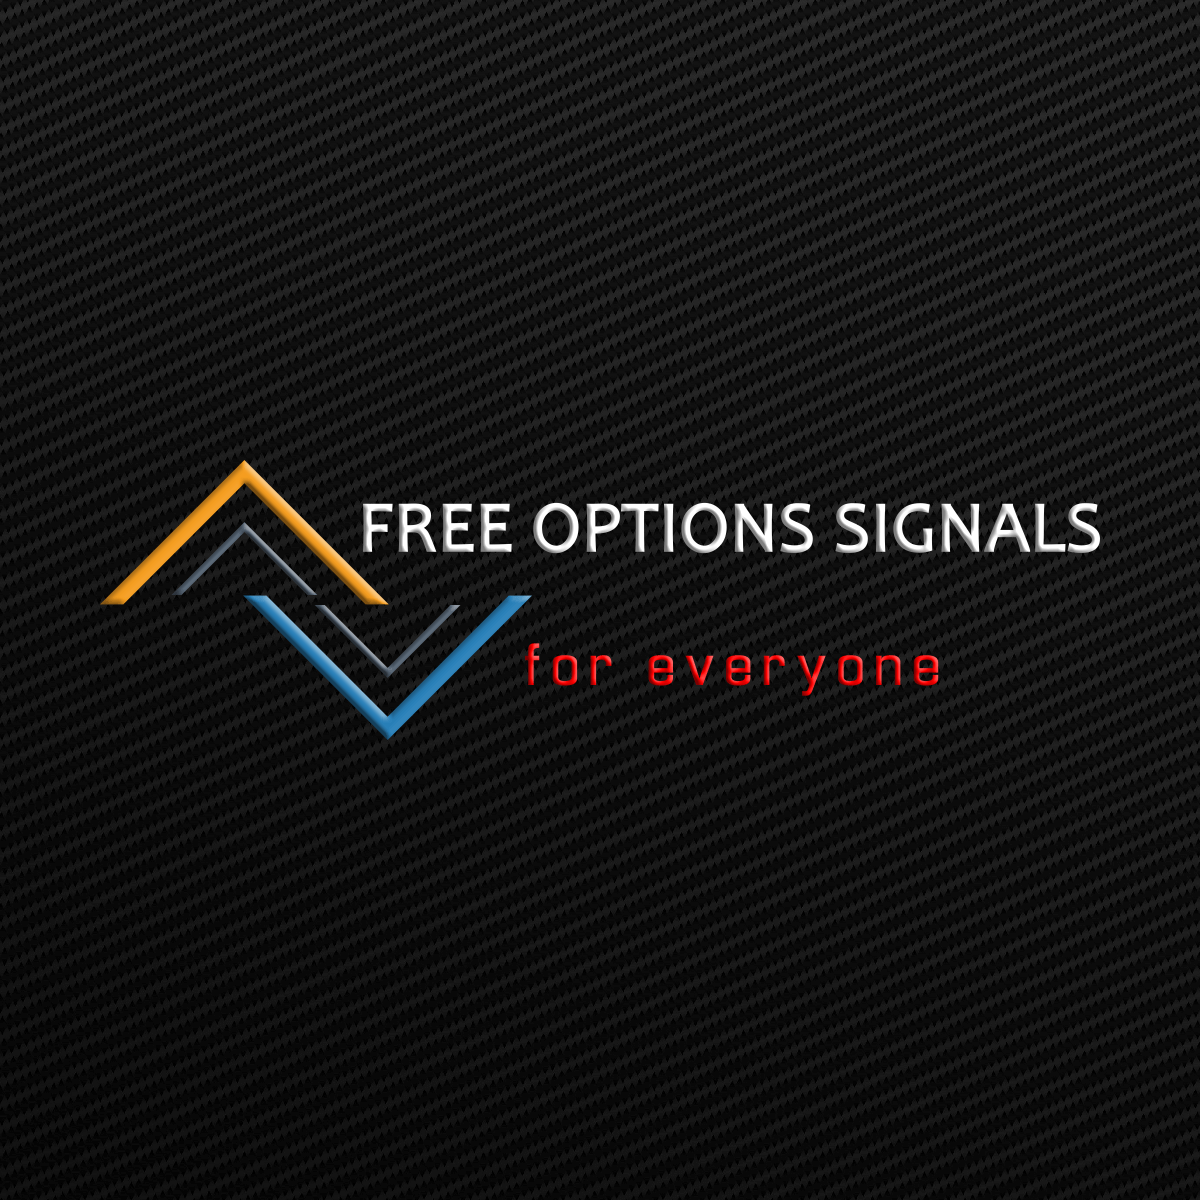 Best binary options signal services